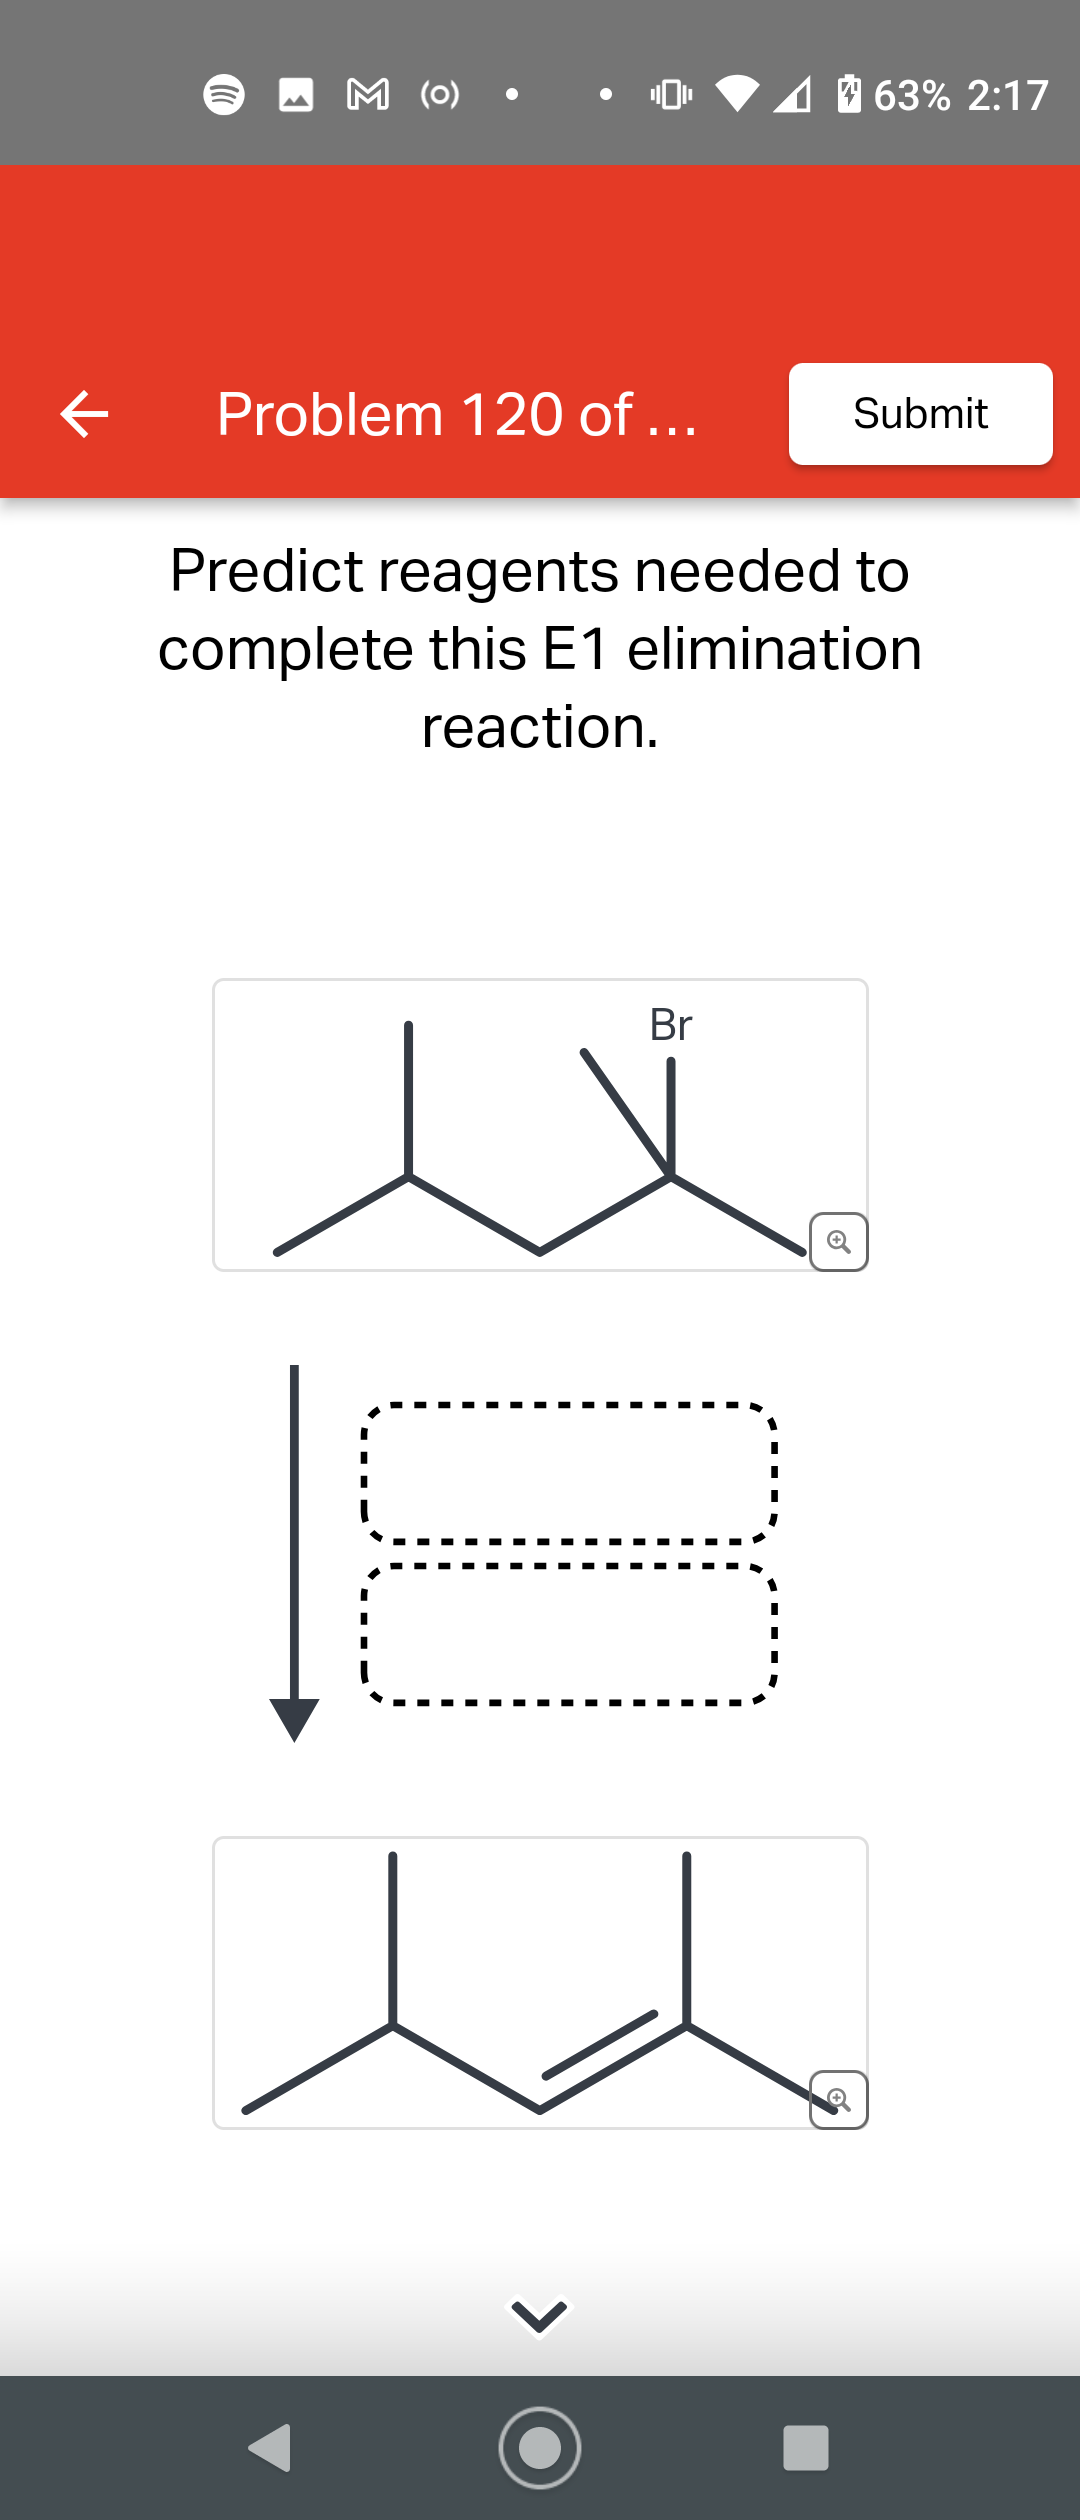 ♫M (0)
Problem 120 of ...
63% 2:17
Br
Submit
Predict reagents needed to
complete this E1 elimination
reaction.